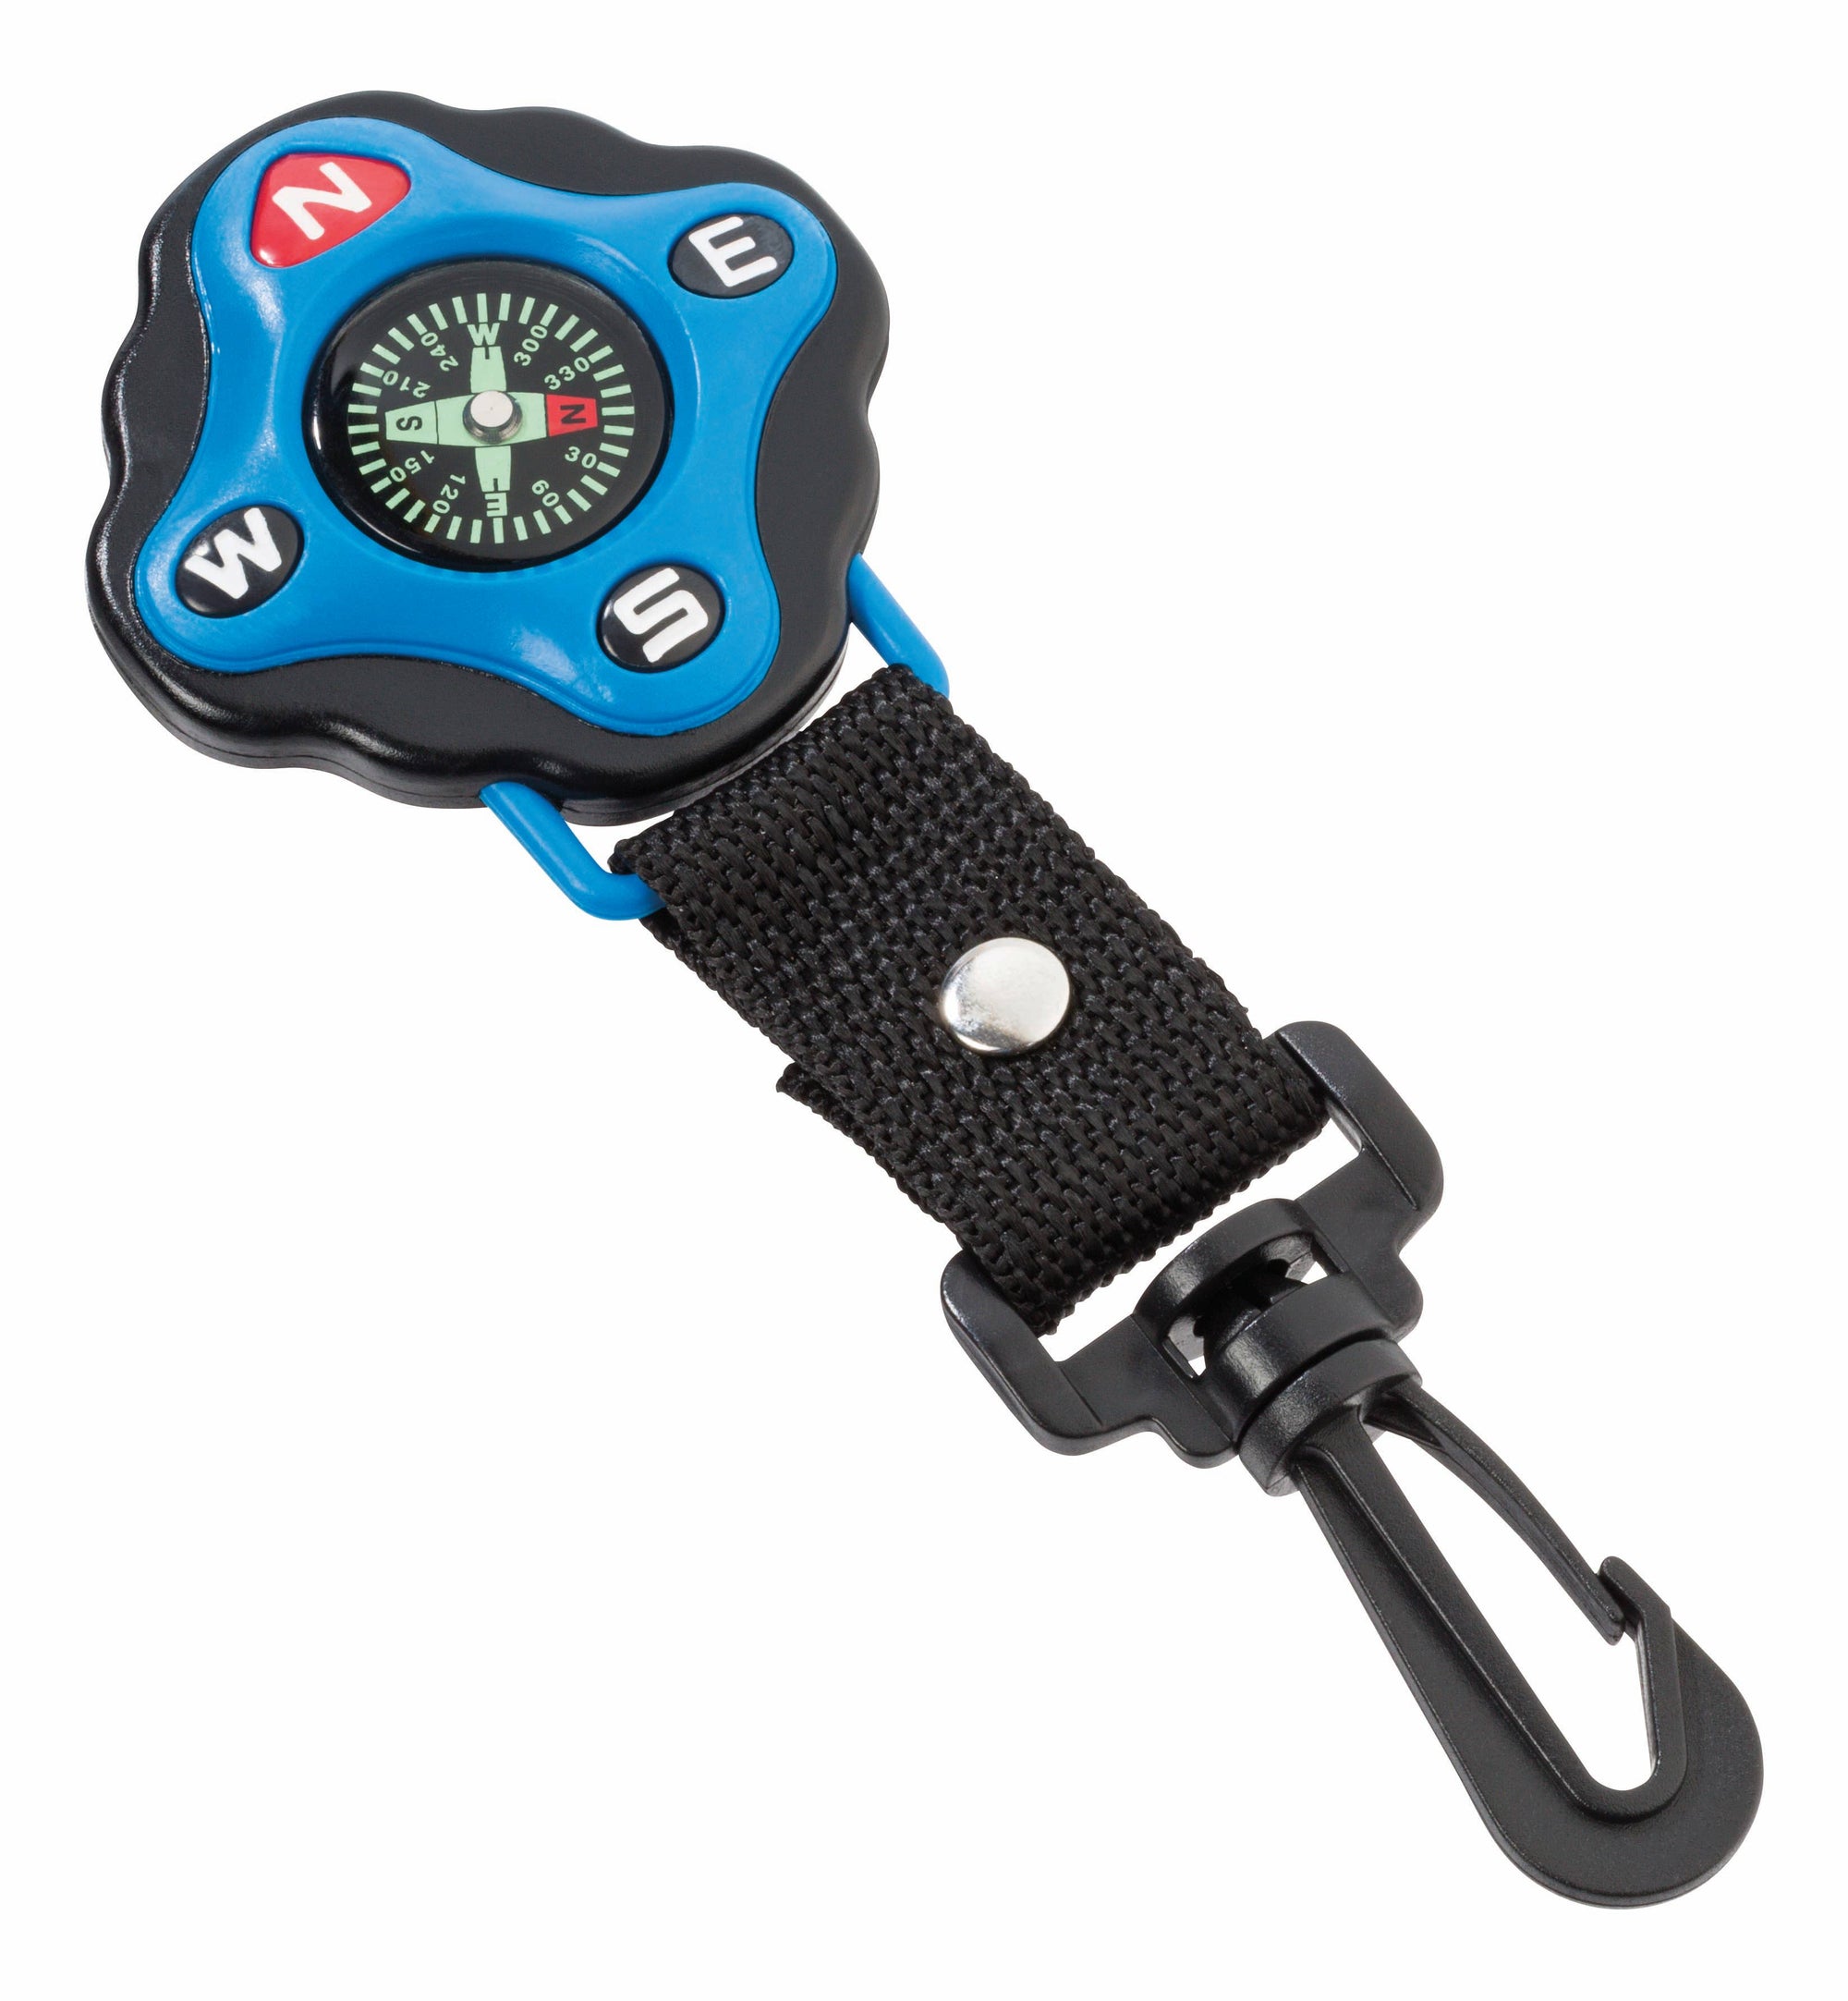 A Outdoor Discovery Backyard Exploration Clip-On Compass with a blue and black casing attached to a carabiner and a black strap, isolated on a white background.